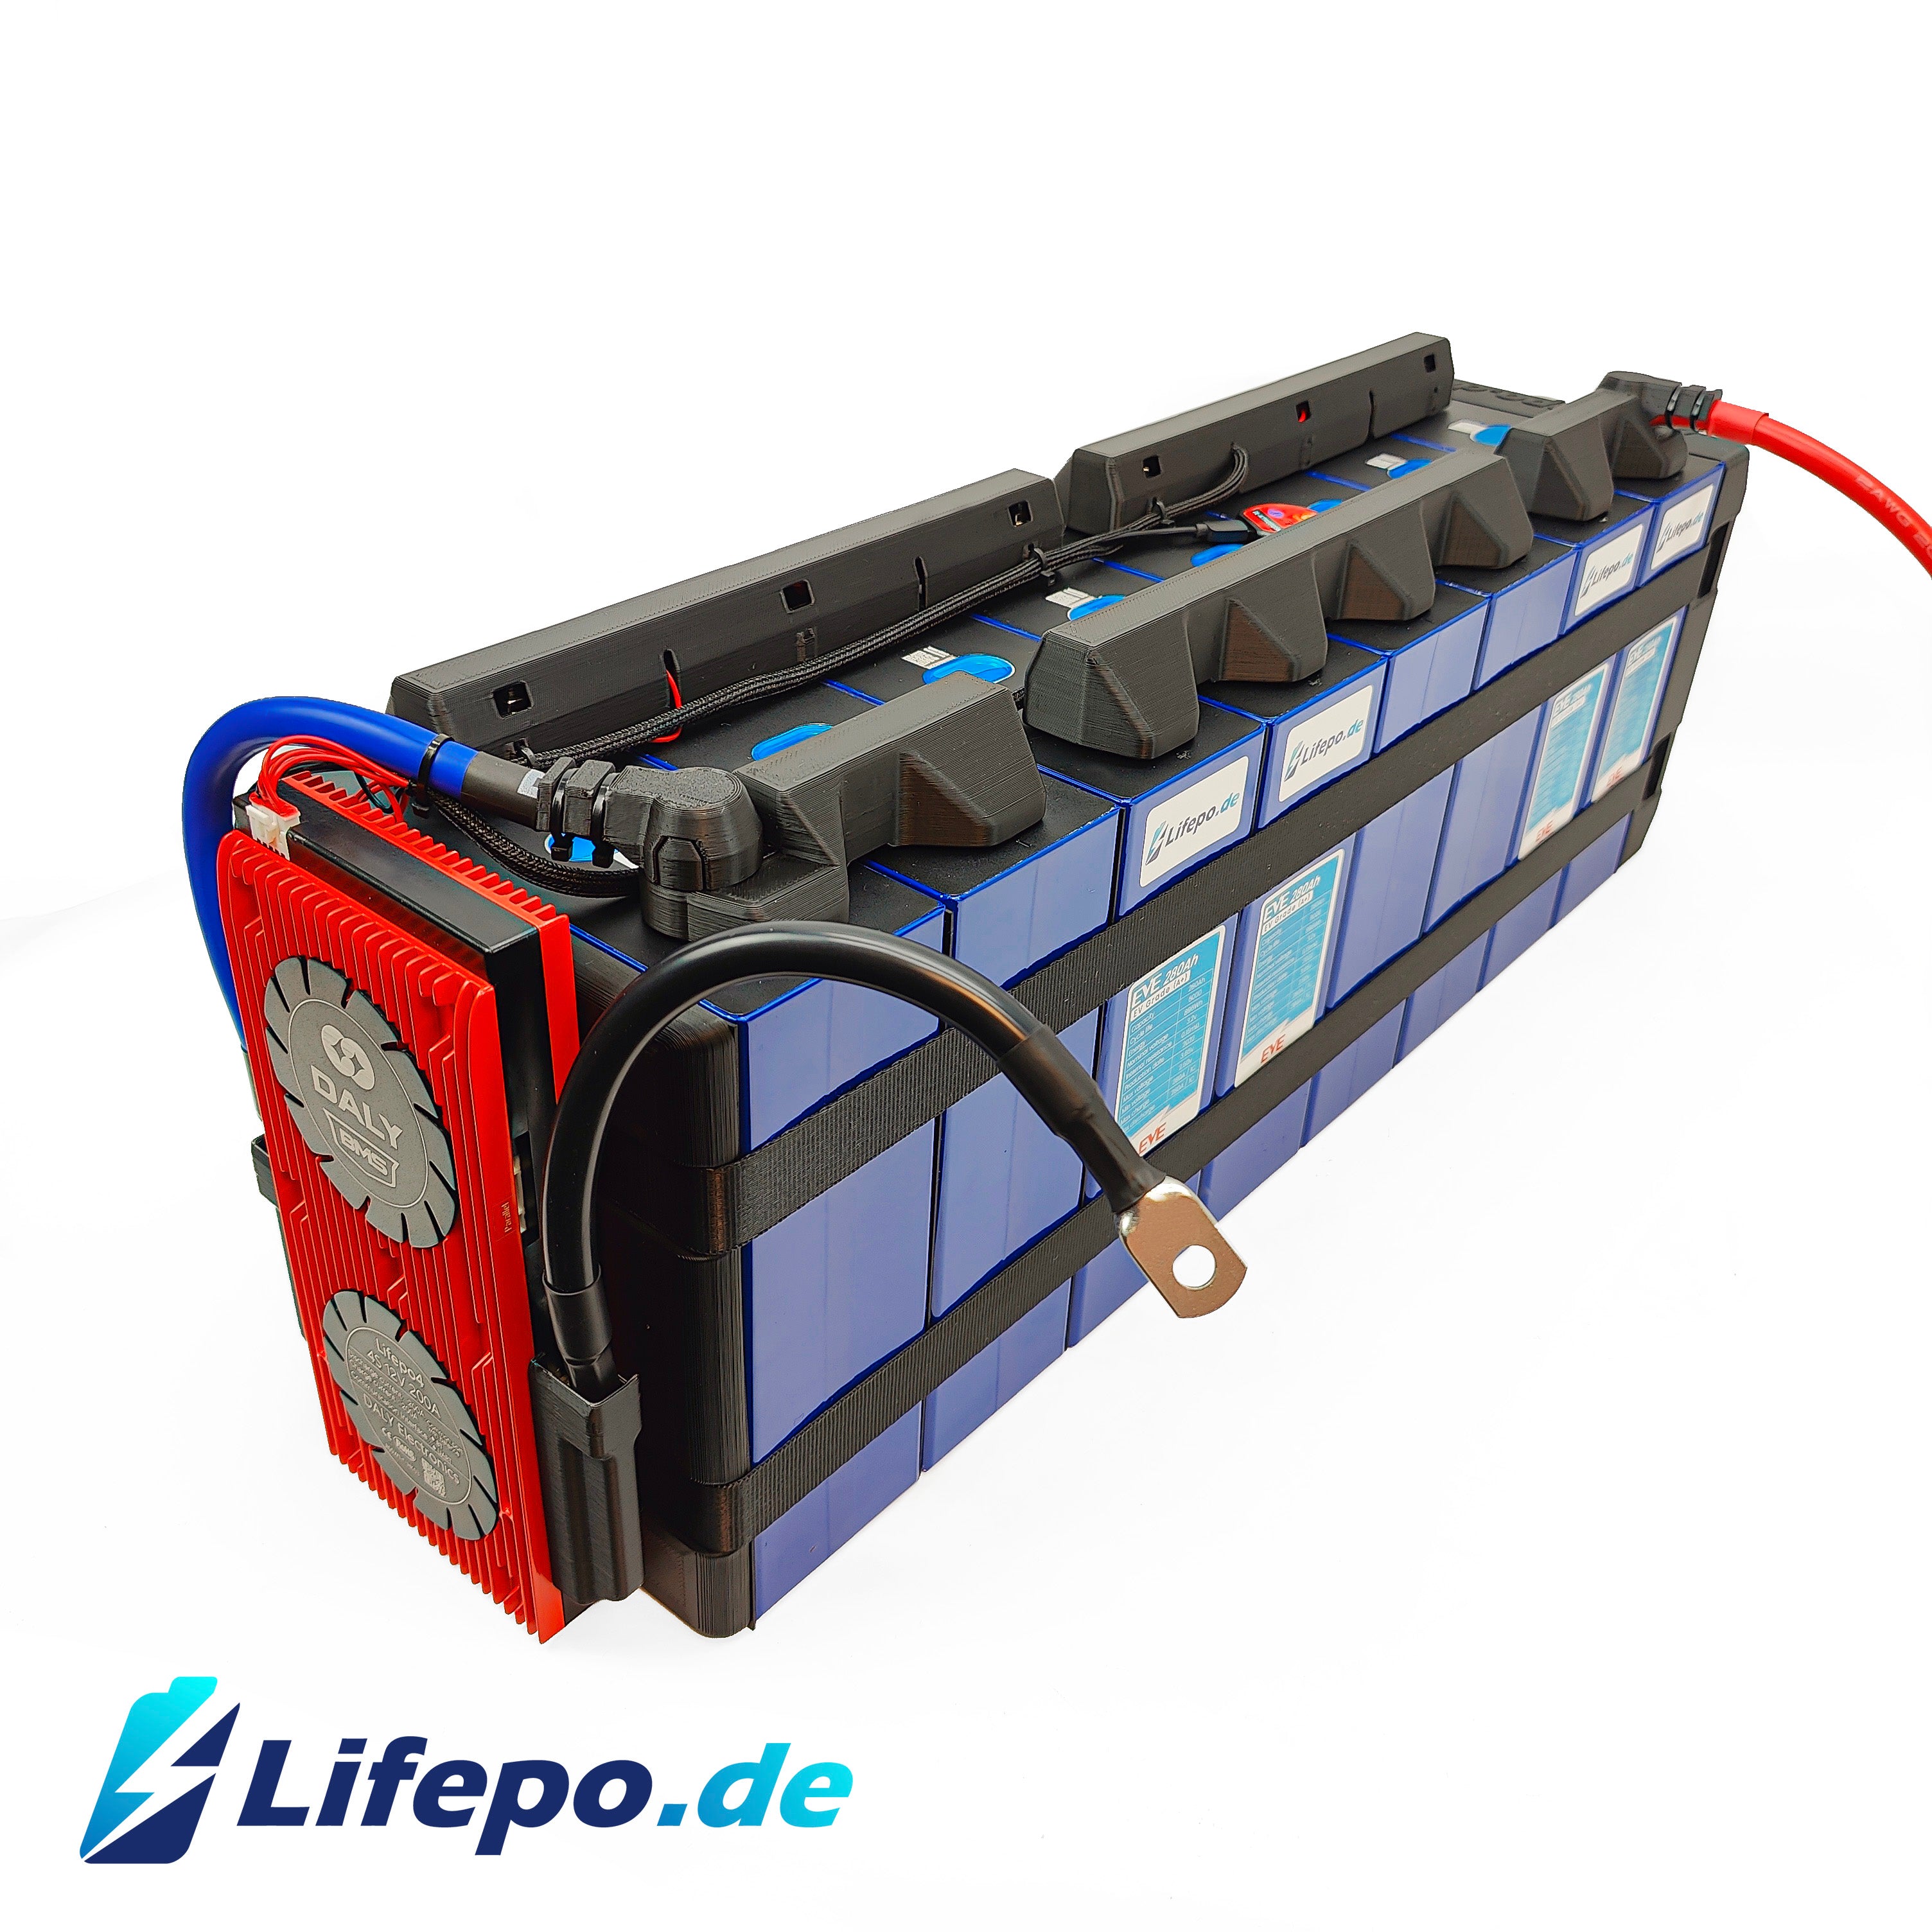 12v 560Ah Lifepo4 battery system with EVE Grade A+ 7.17kWh